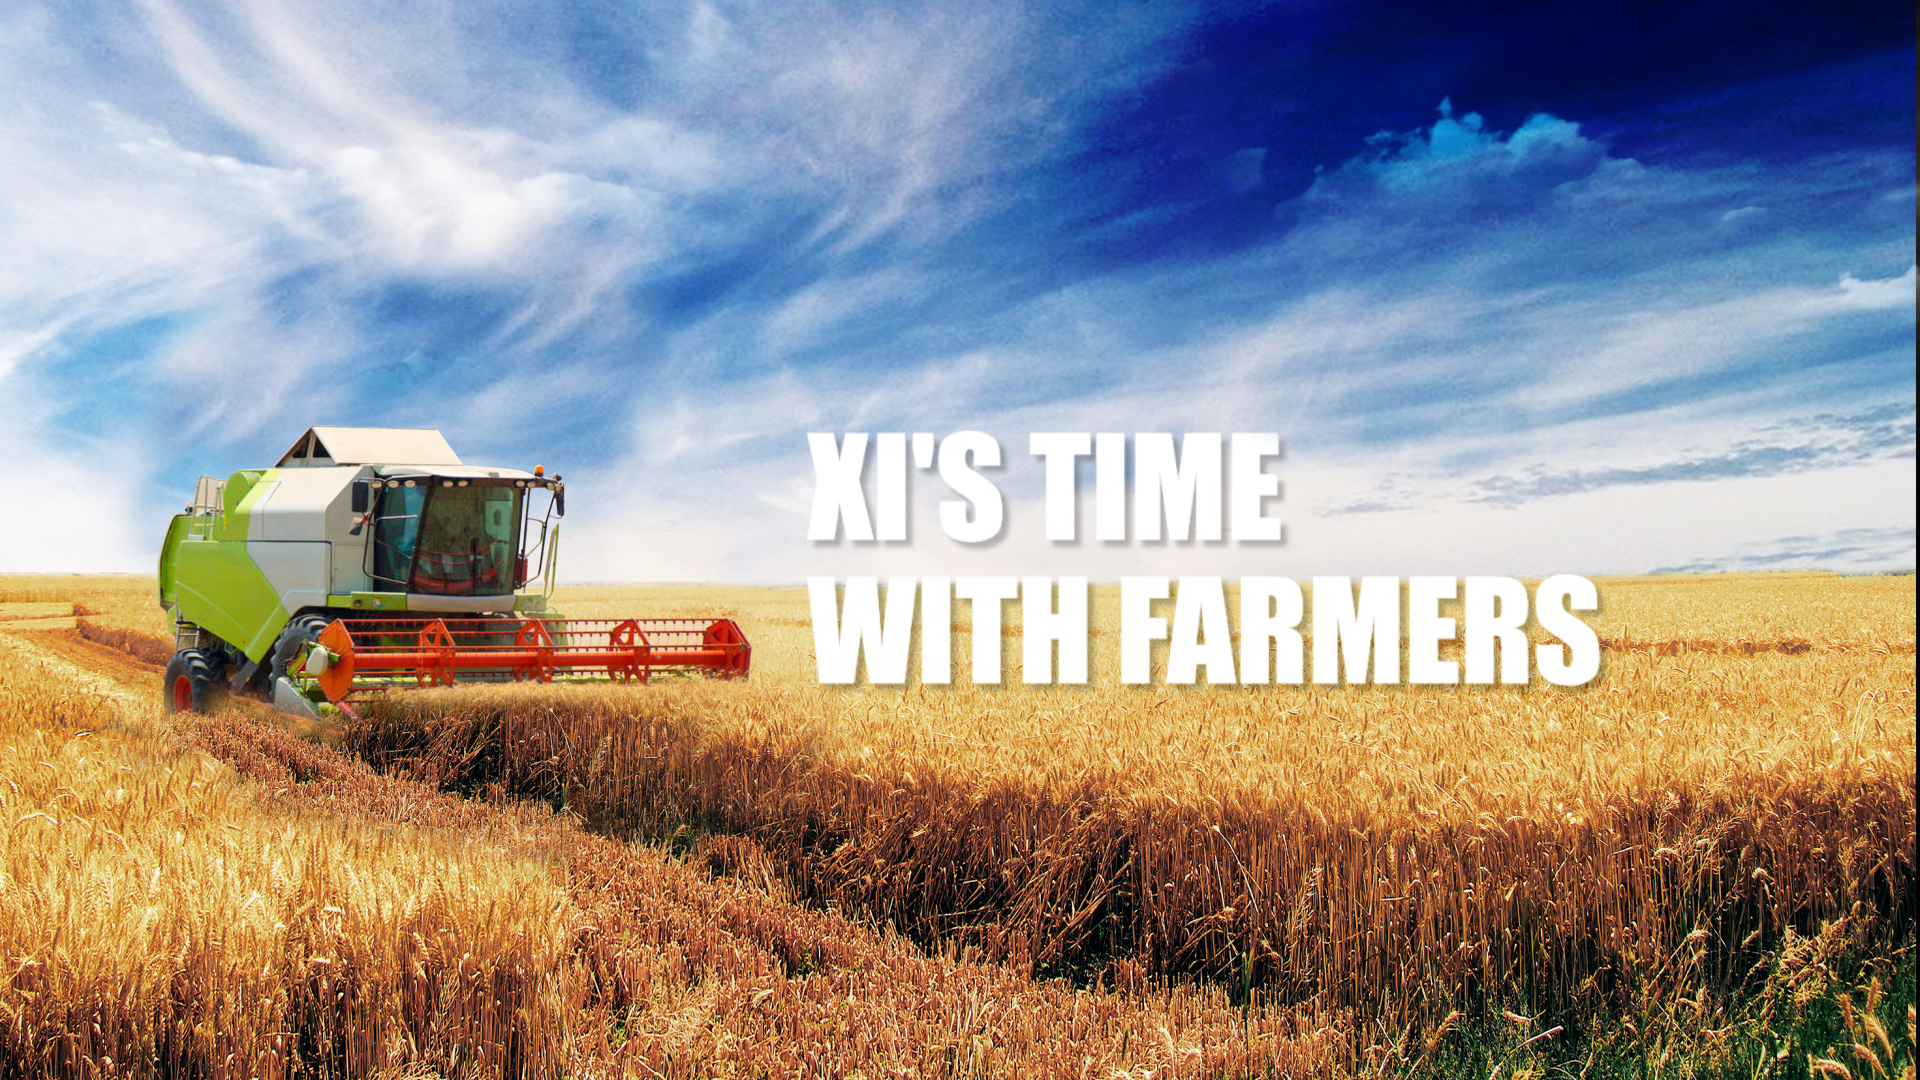 Xi's Time with Farmers